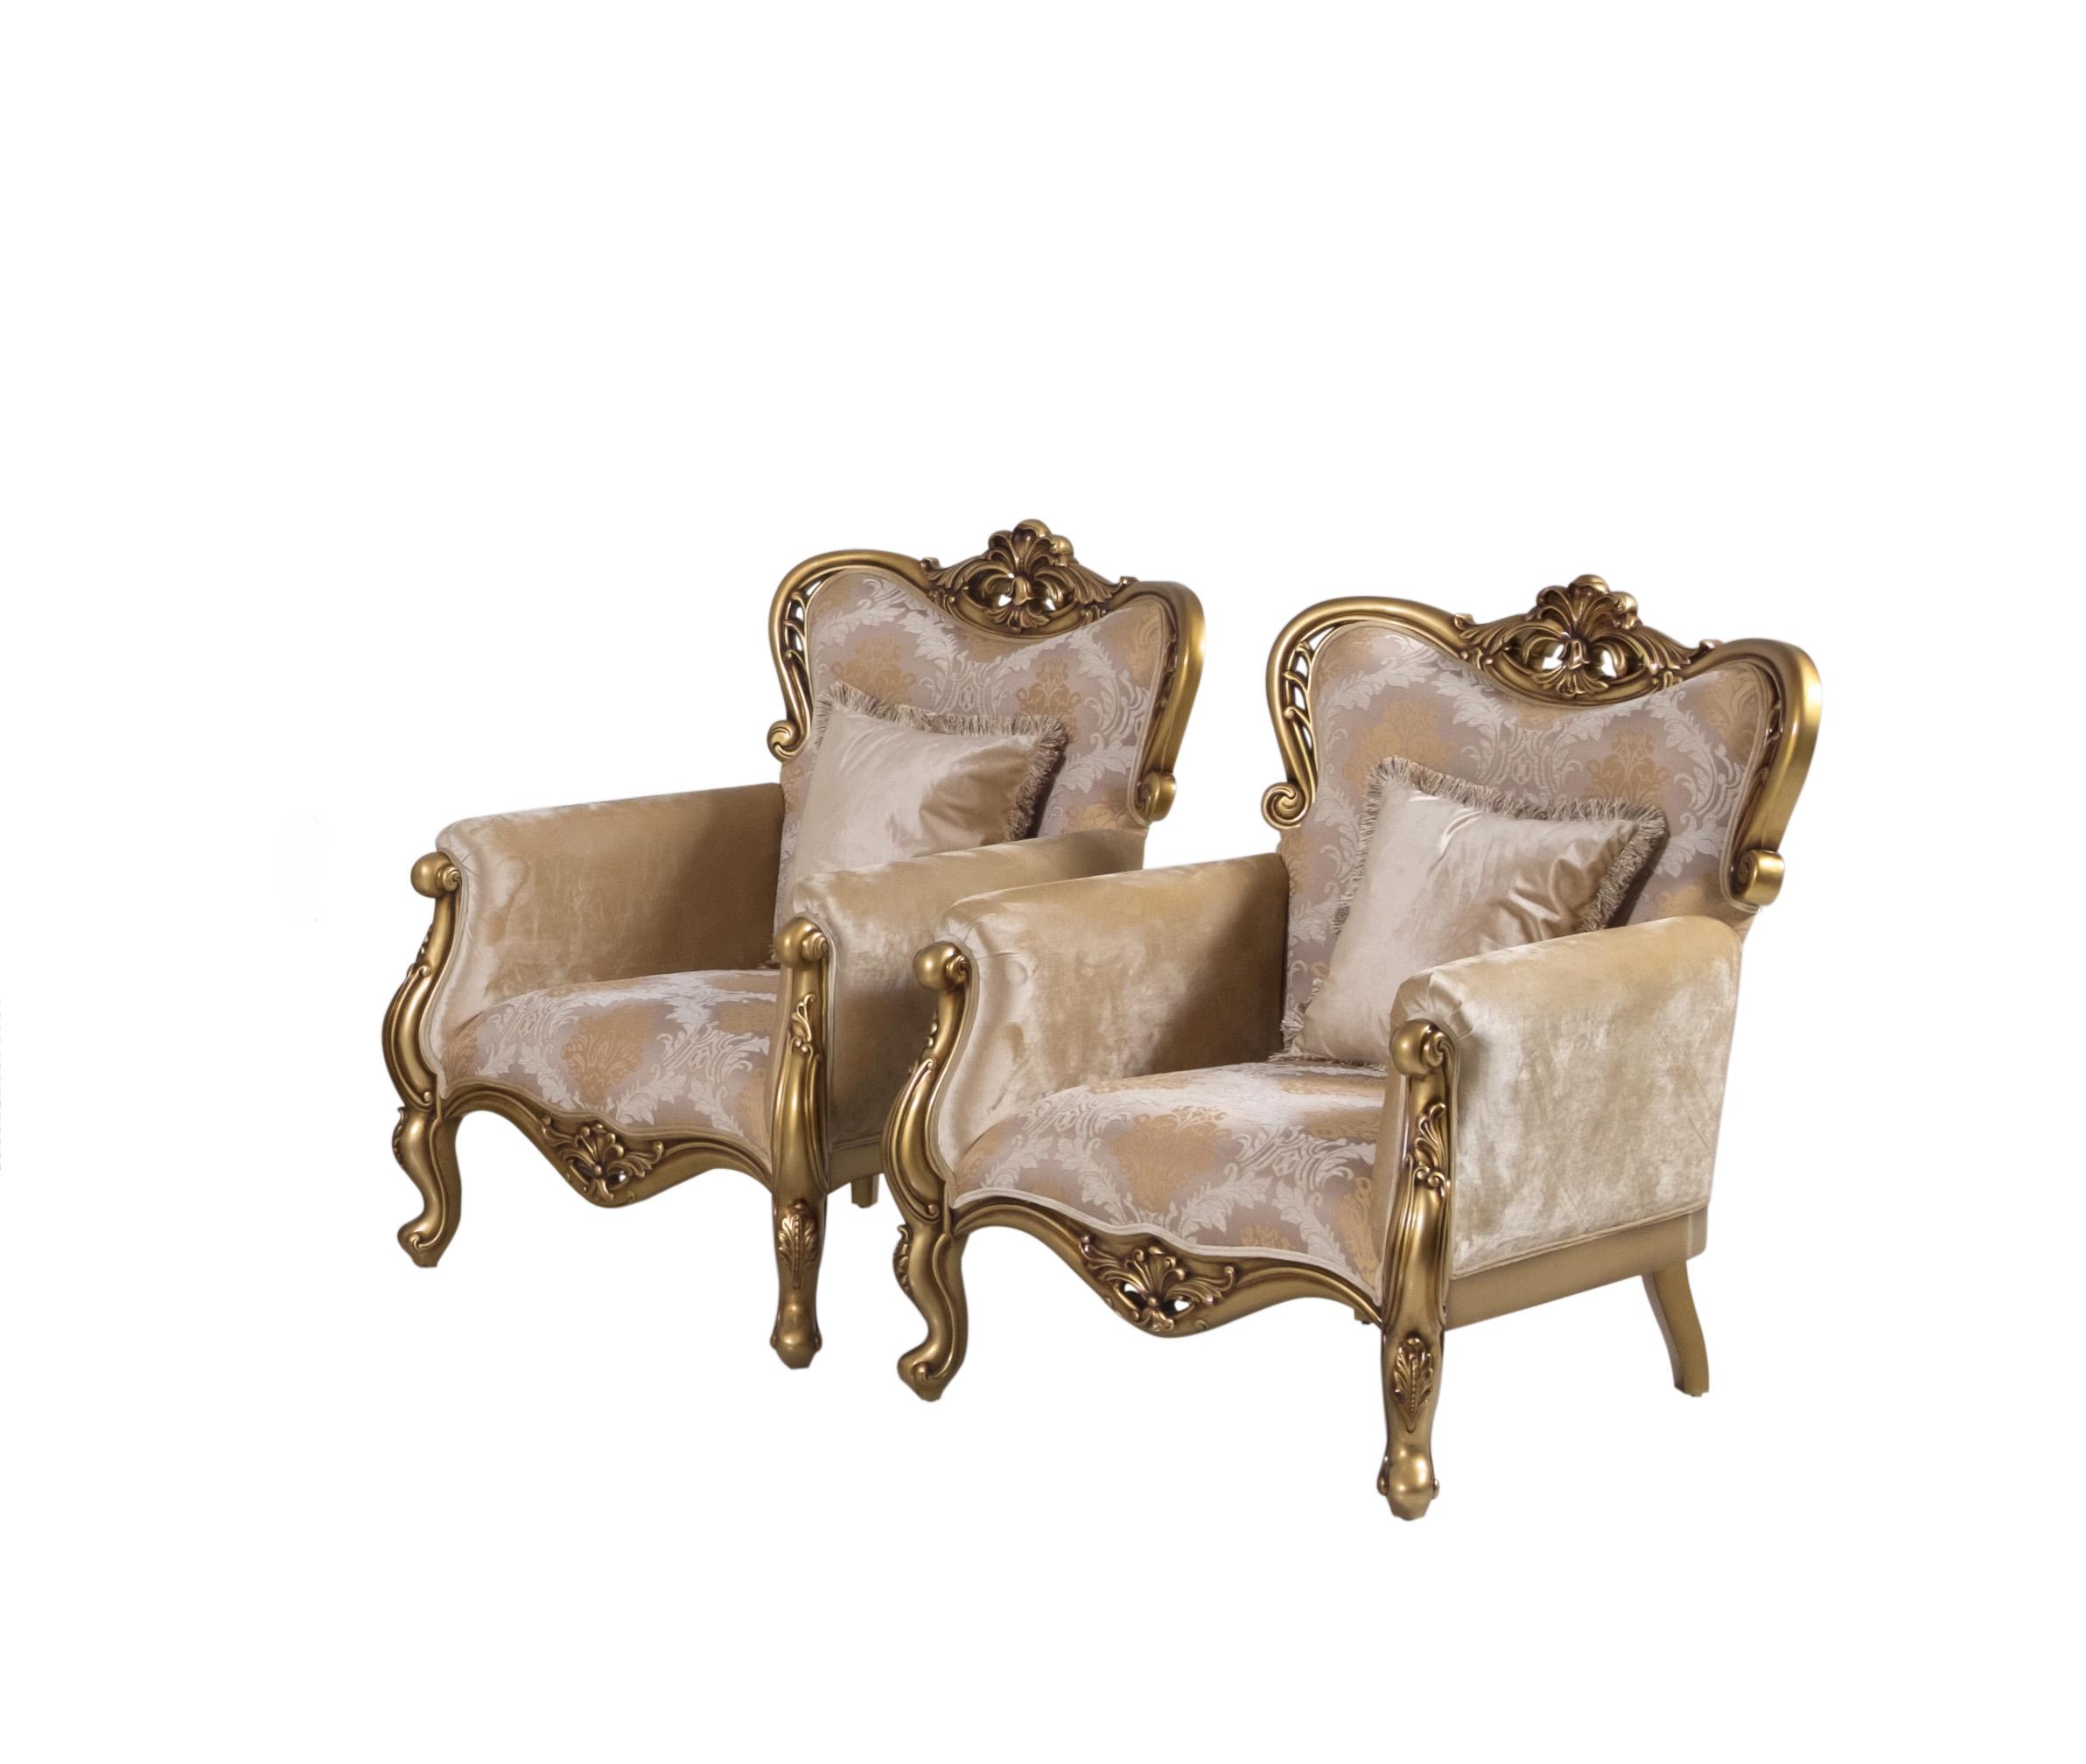 Classic, Traditional Arm Chair Set CLEOPATRA 4798-C-Set-2 in Gold, Bronze Fabric